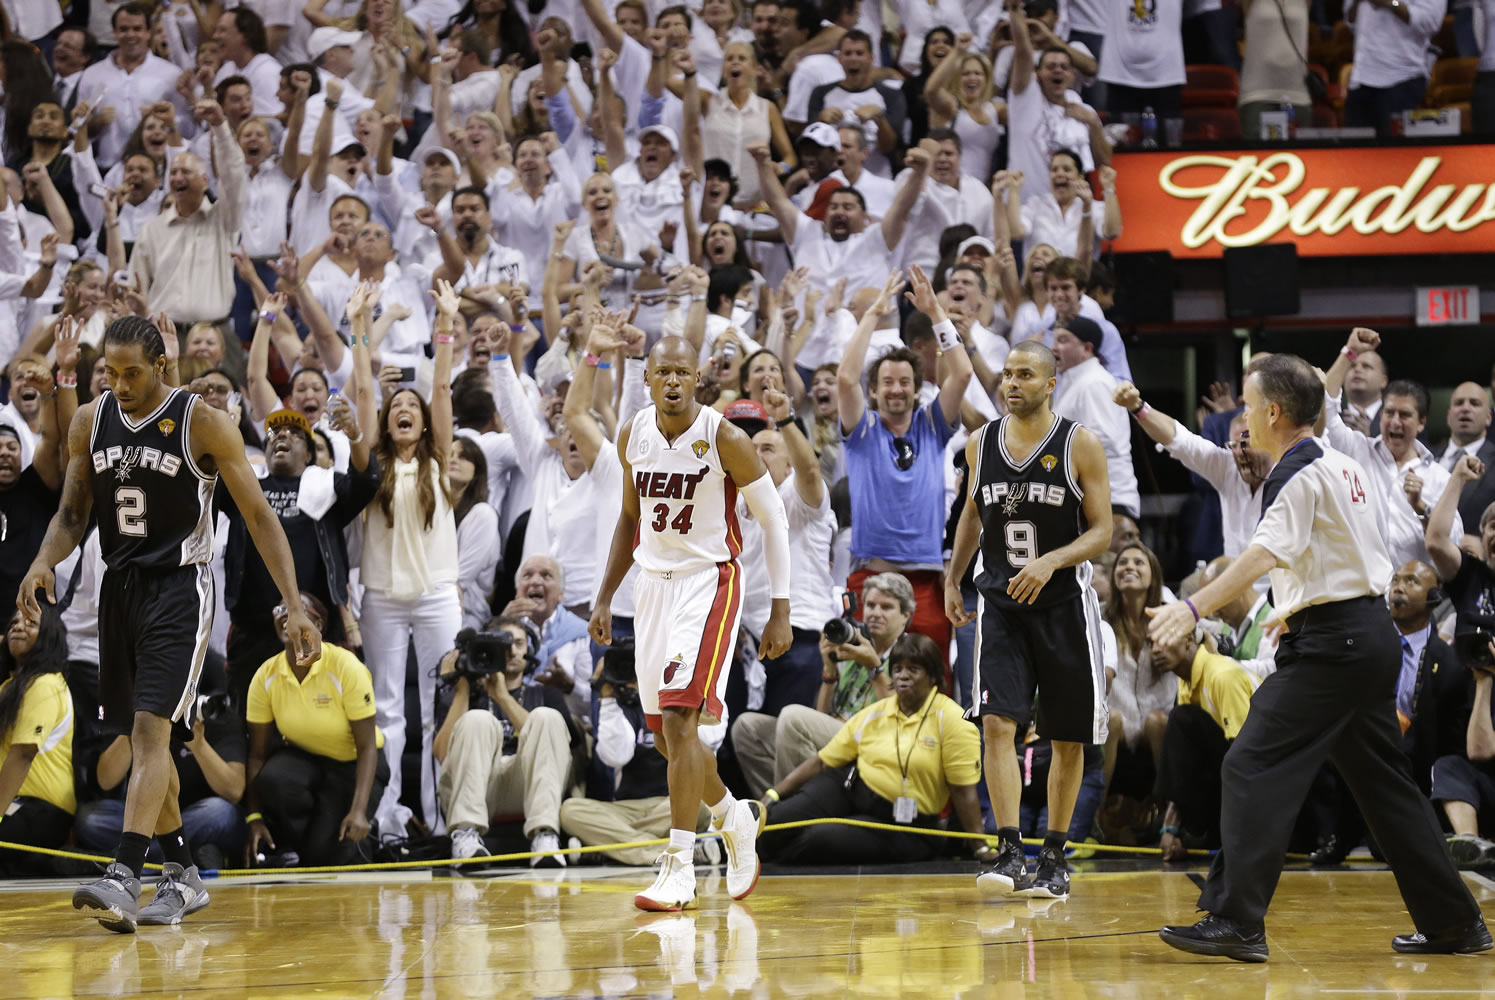 Miami Heat shooting guard Ray Allen (34) reacts to shot that took the game into overtime inf Game 6 of the NBA Finals on Wednesday in Miami.